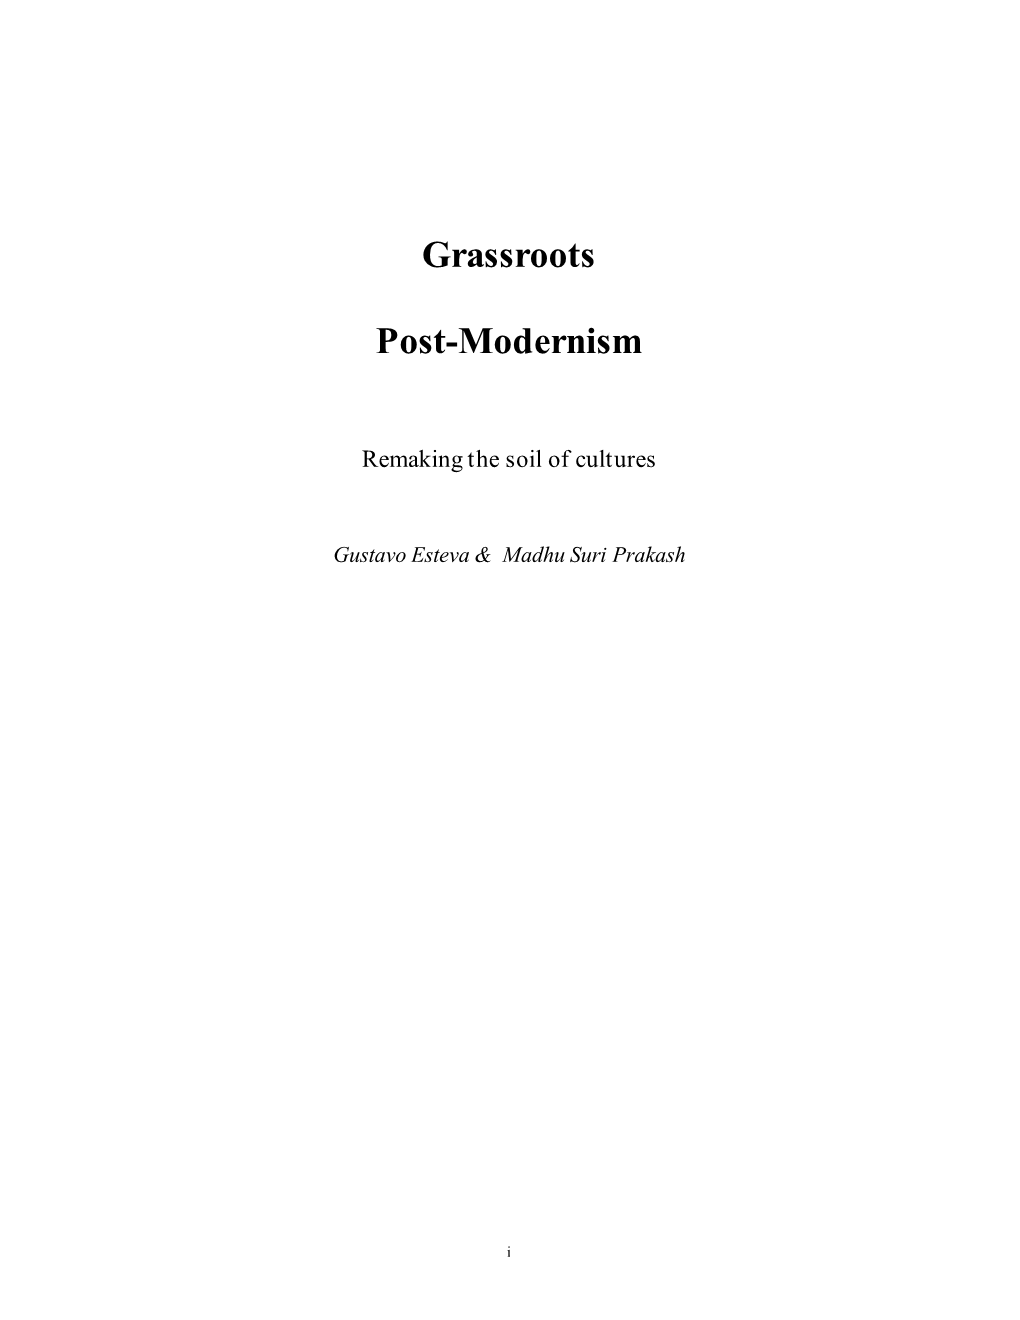 Grassroots Post-Modernism Is Daring in Its Thesis That the Real Postmodernists Are to Be Found Among the Zapotecos and Rajasthanis of the Majority World